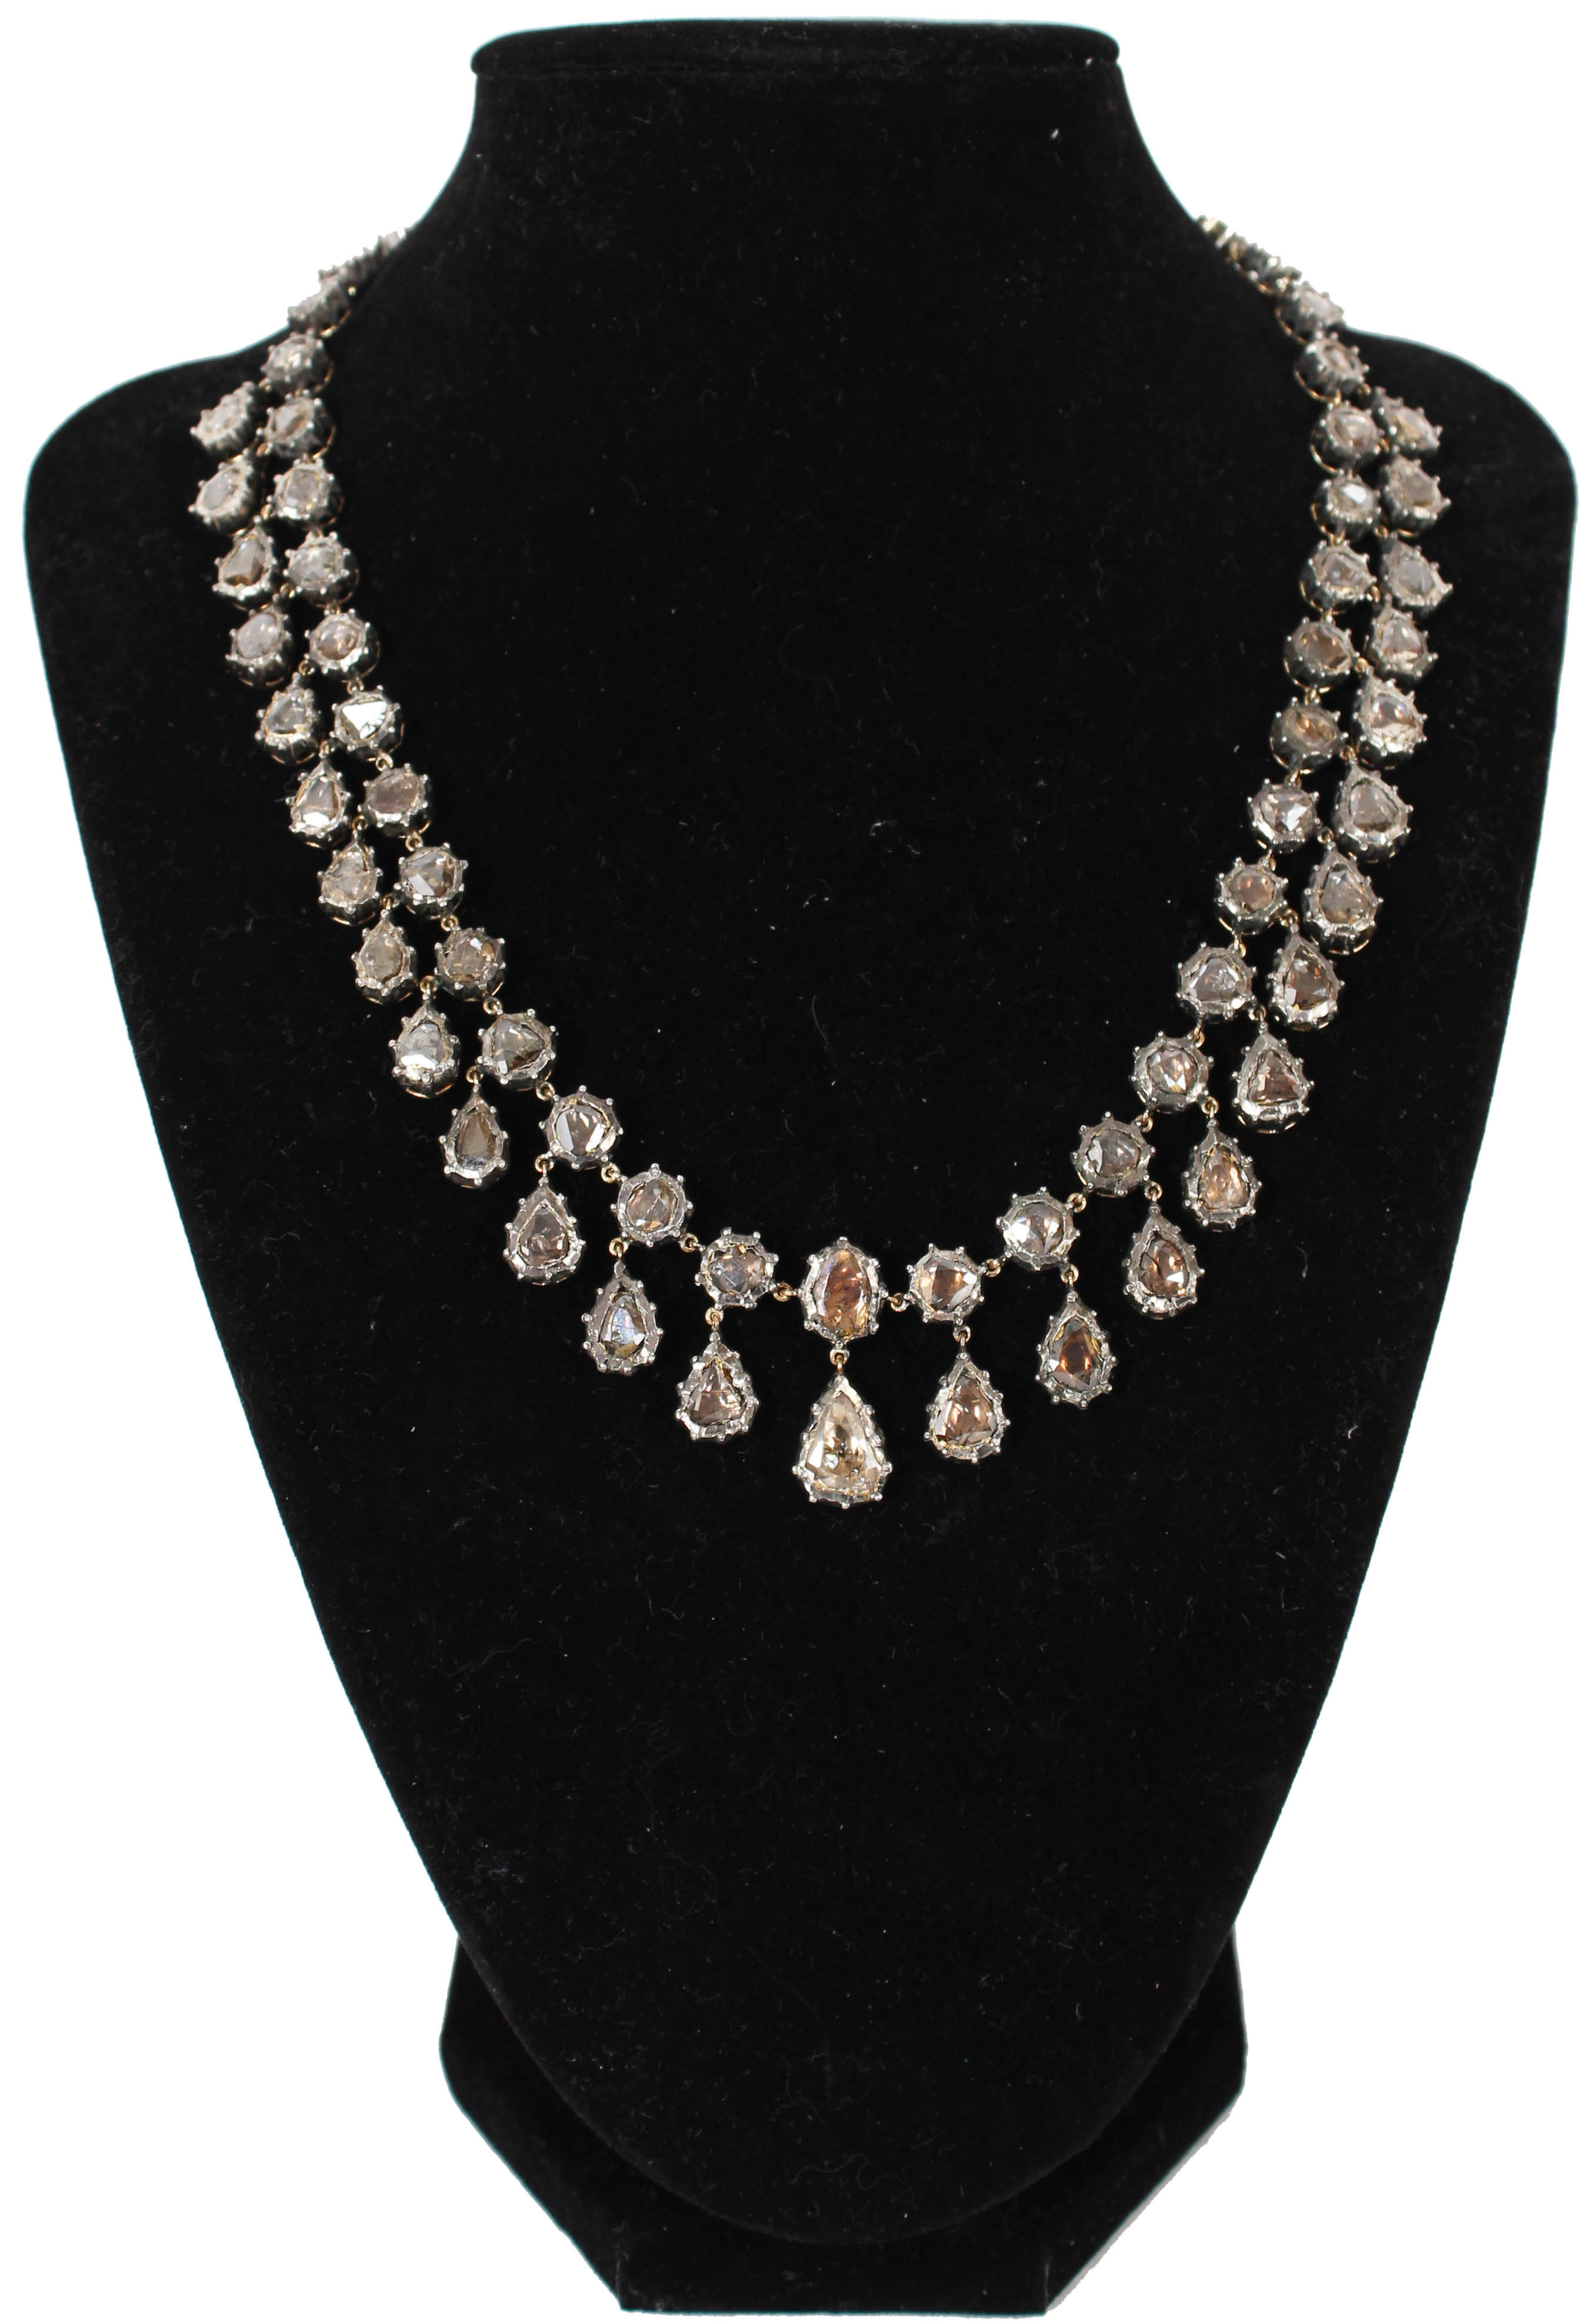 Diamond, 22k gold and sterling necklace, $11,970